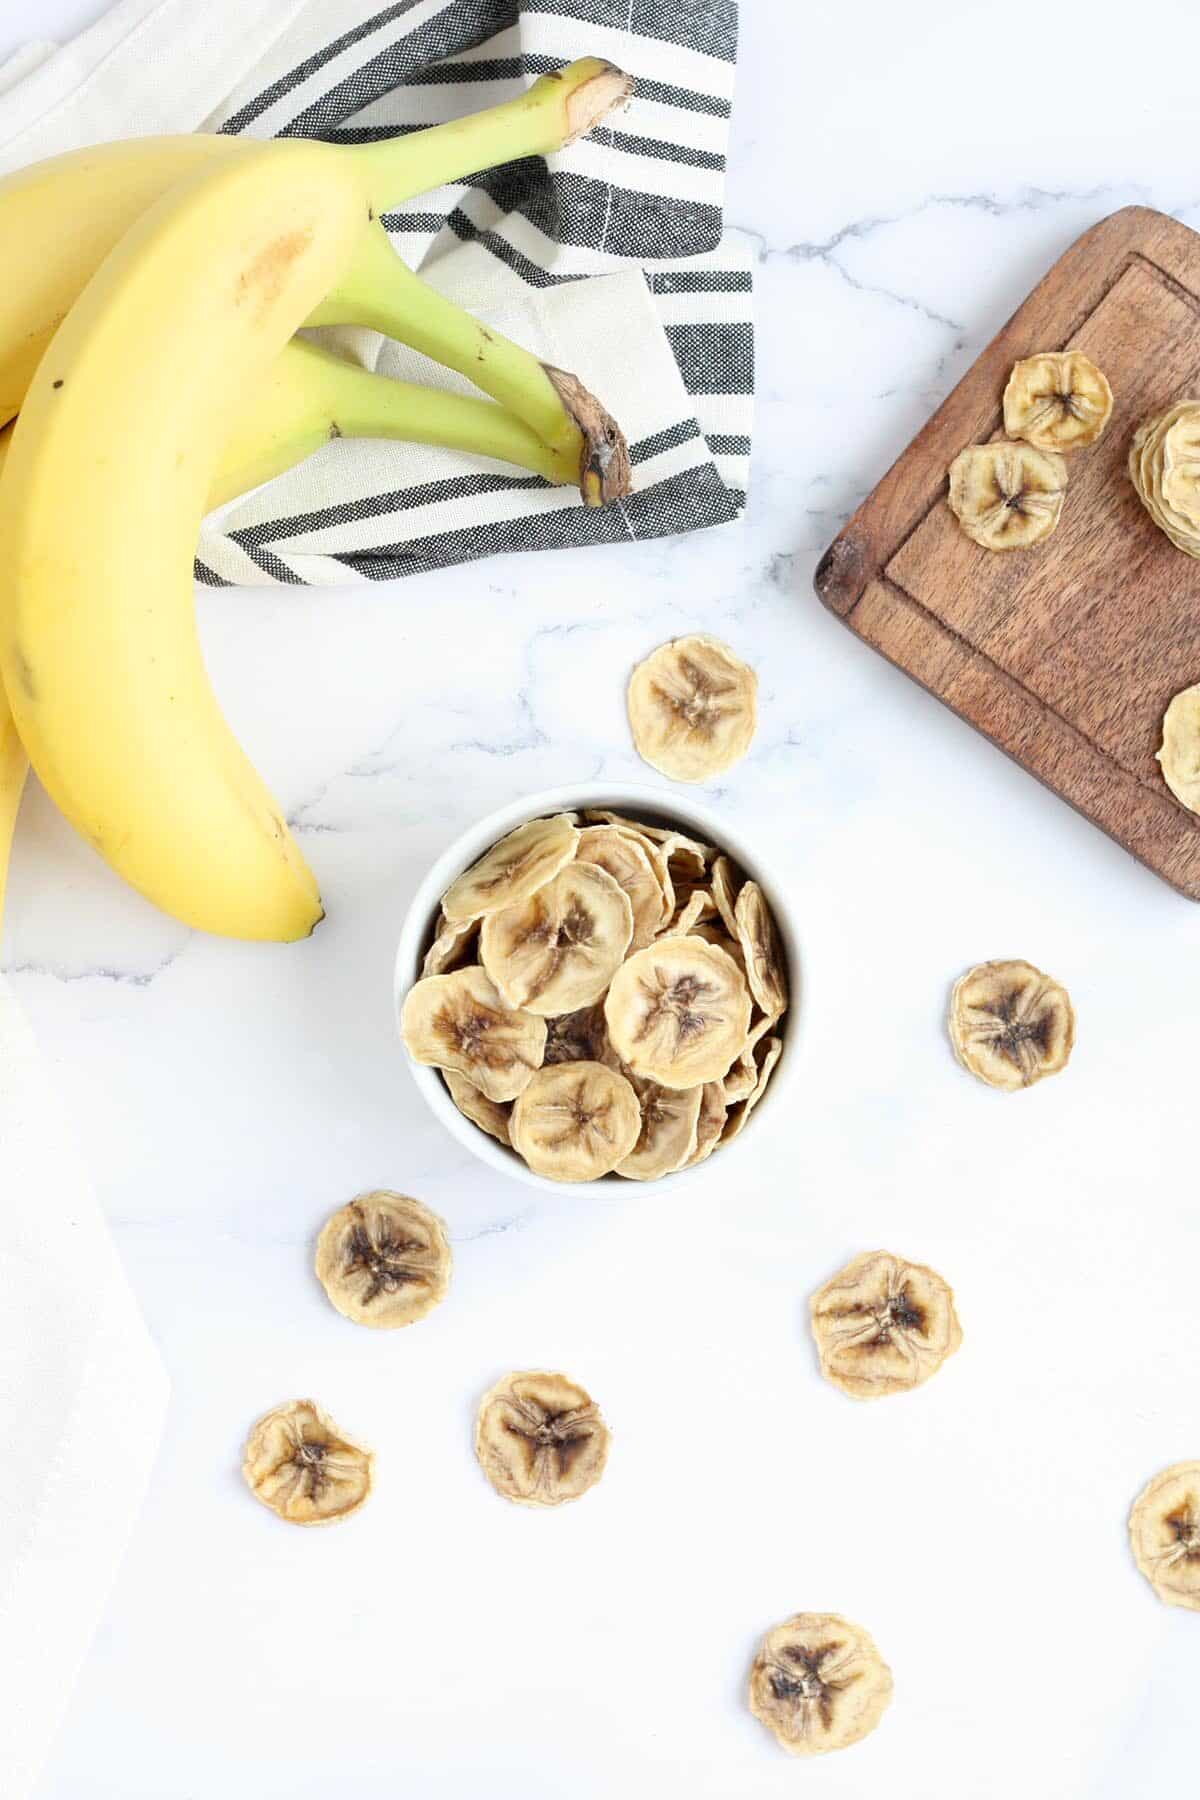 An overhead view of fresh bananas and homemade banana chips on a marble surface with a wooden cutting board in the background